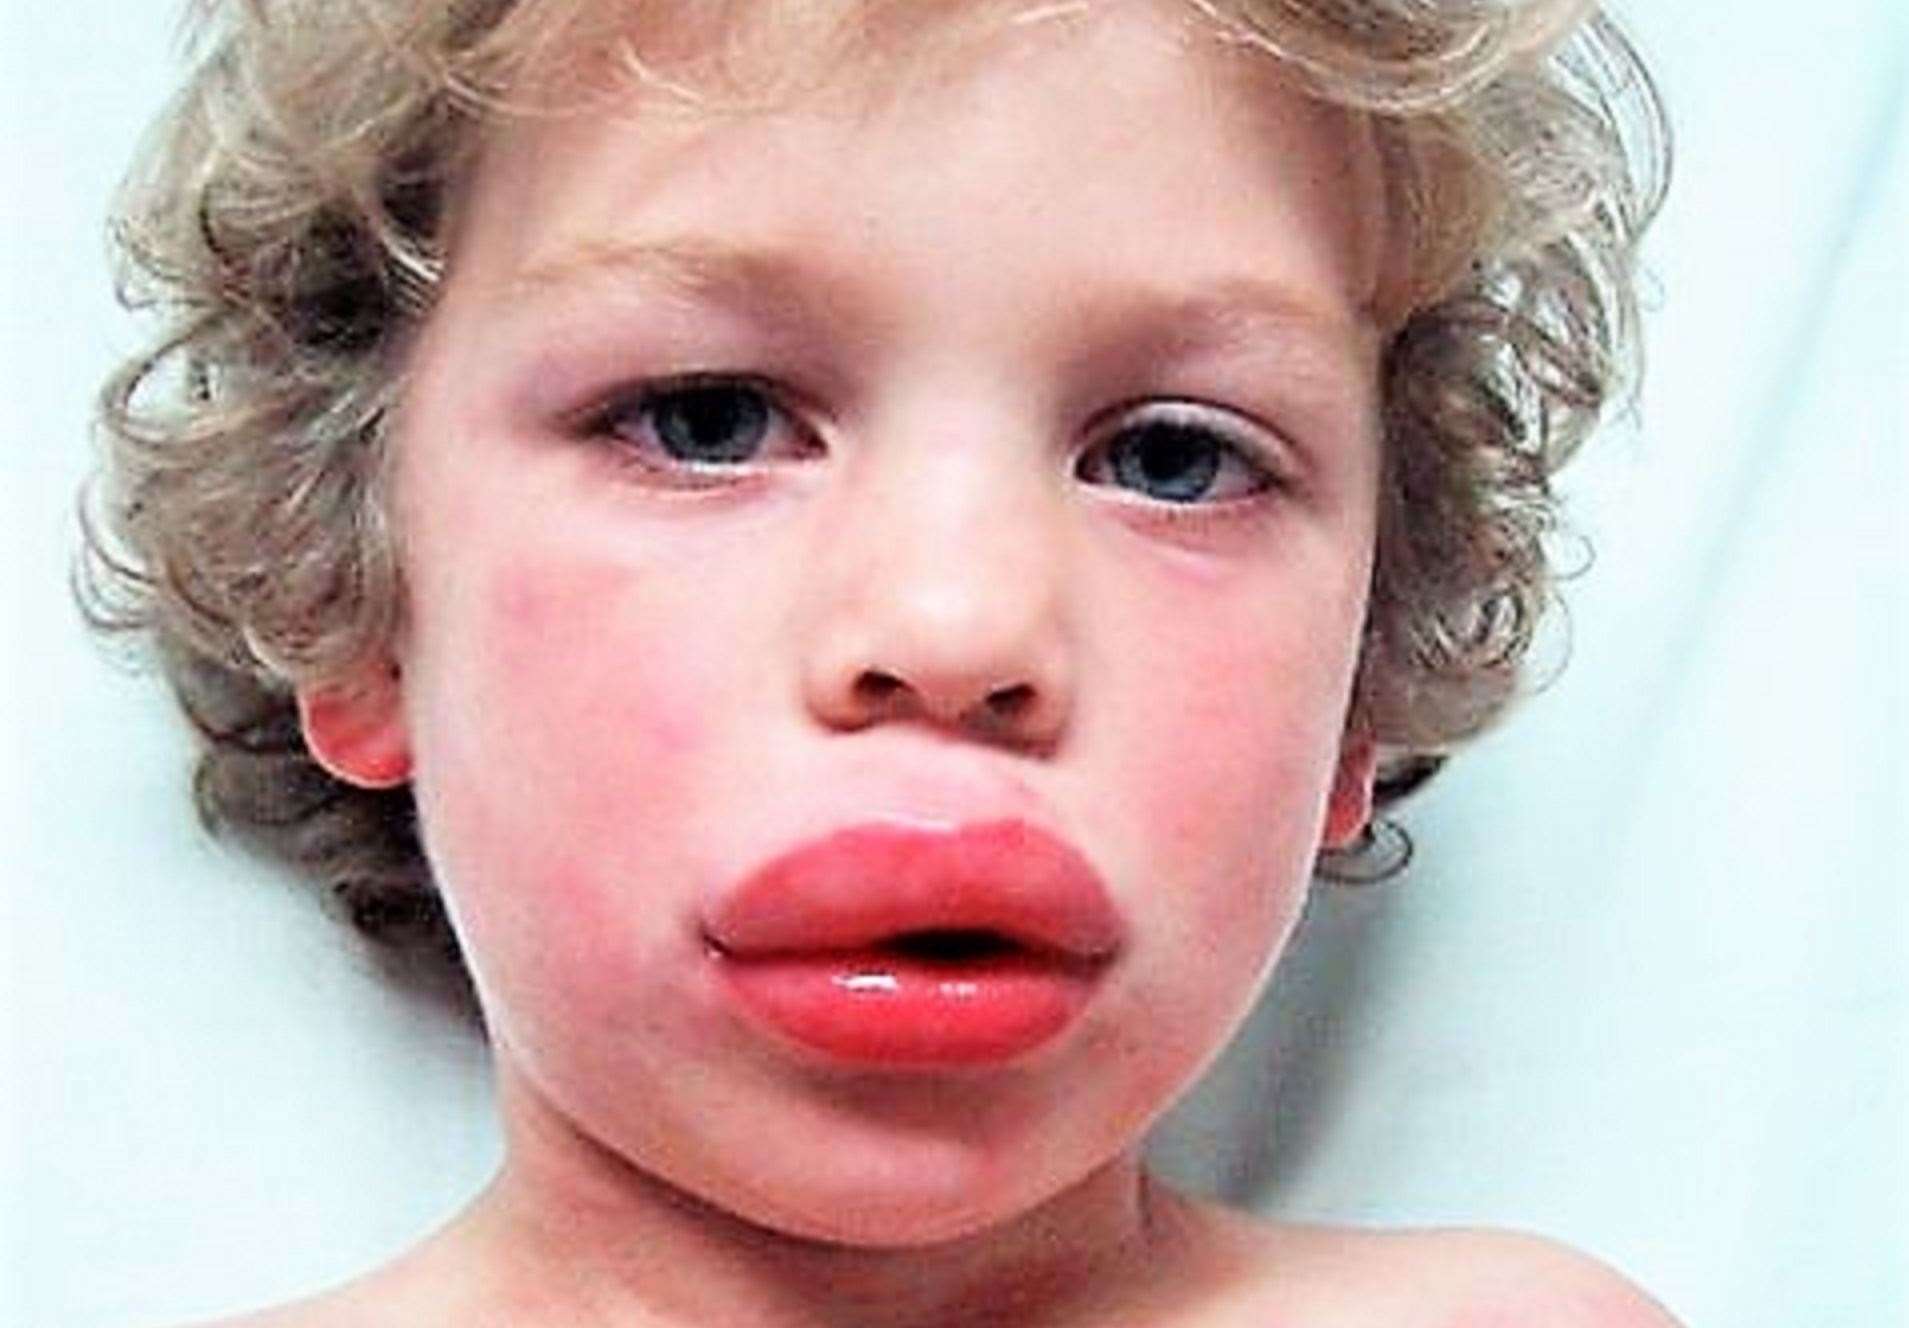 A boy suffering from the effects of anaphylaxis showing a rash and swelling of the lips.